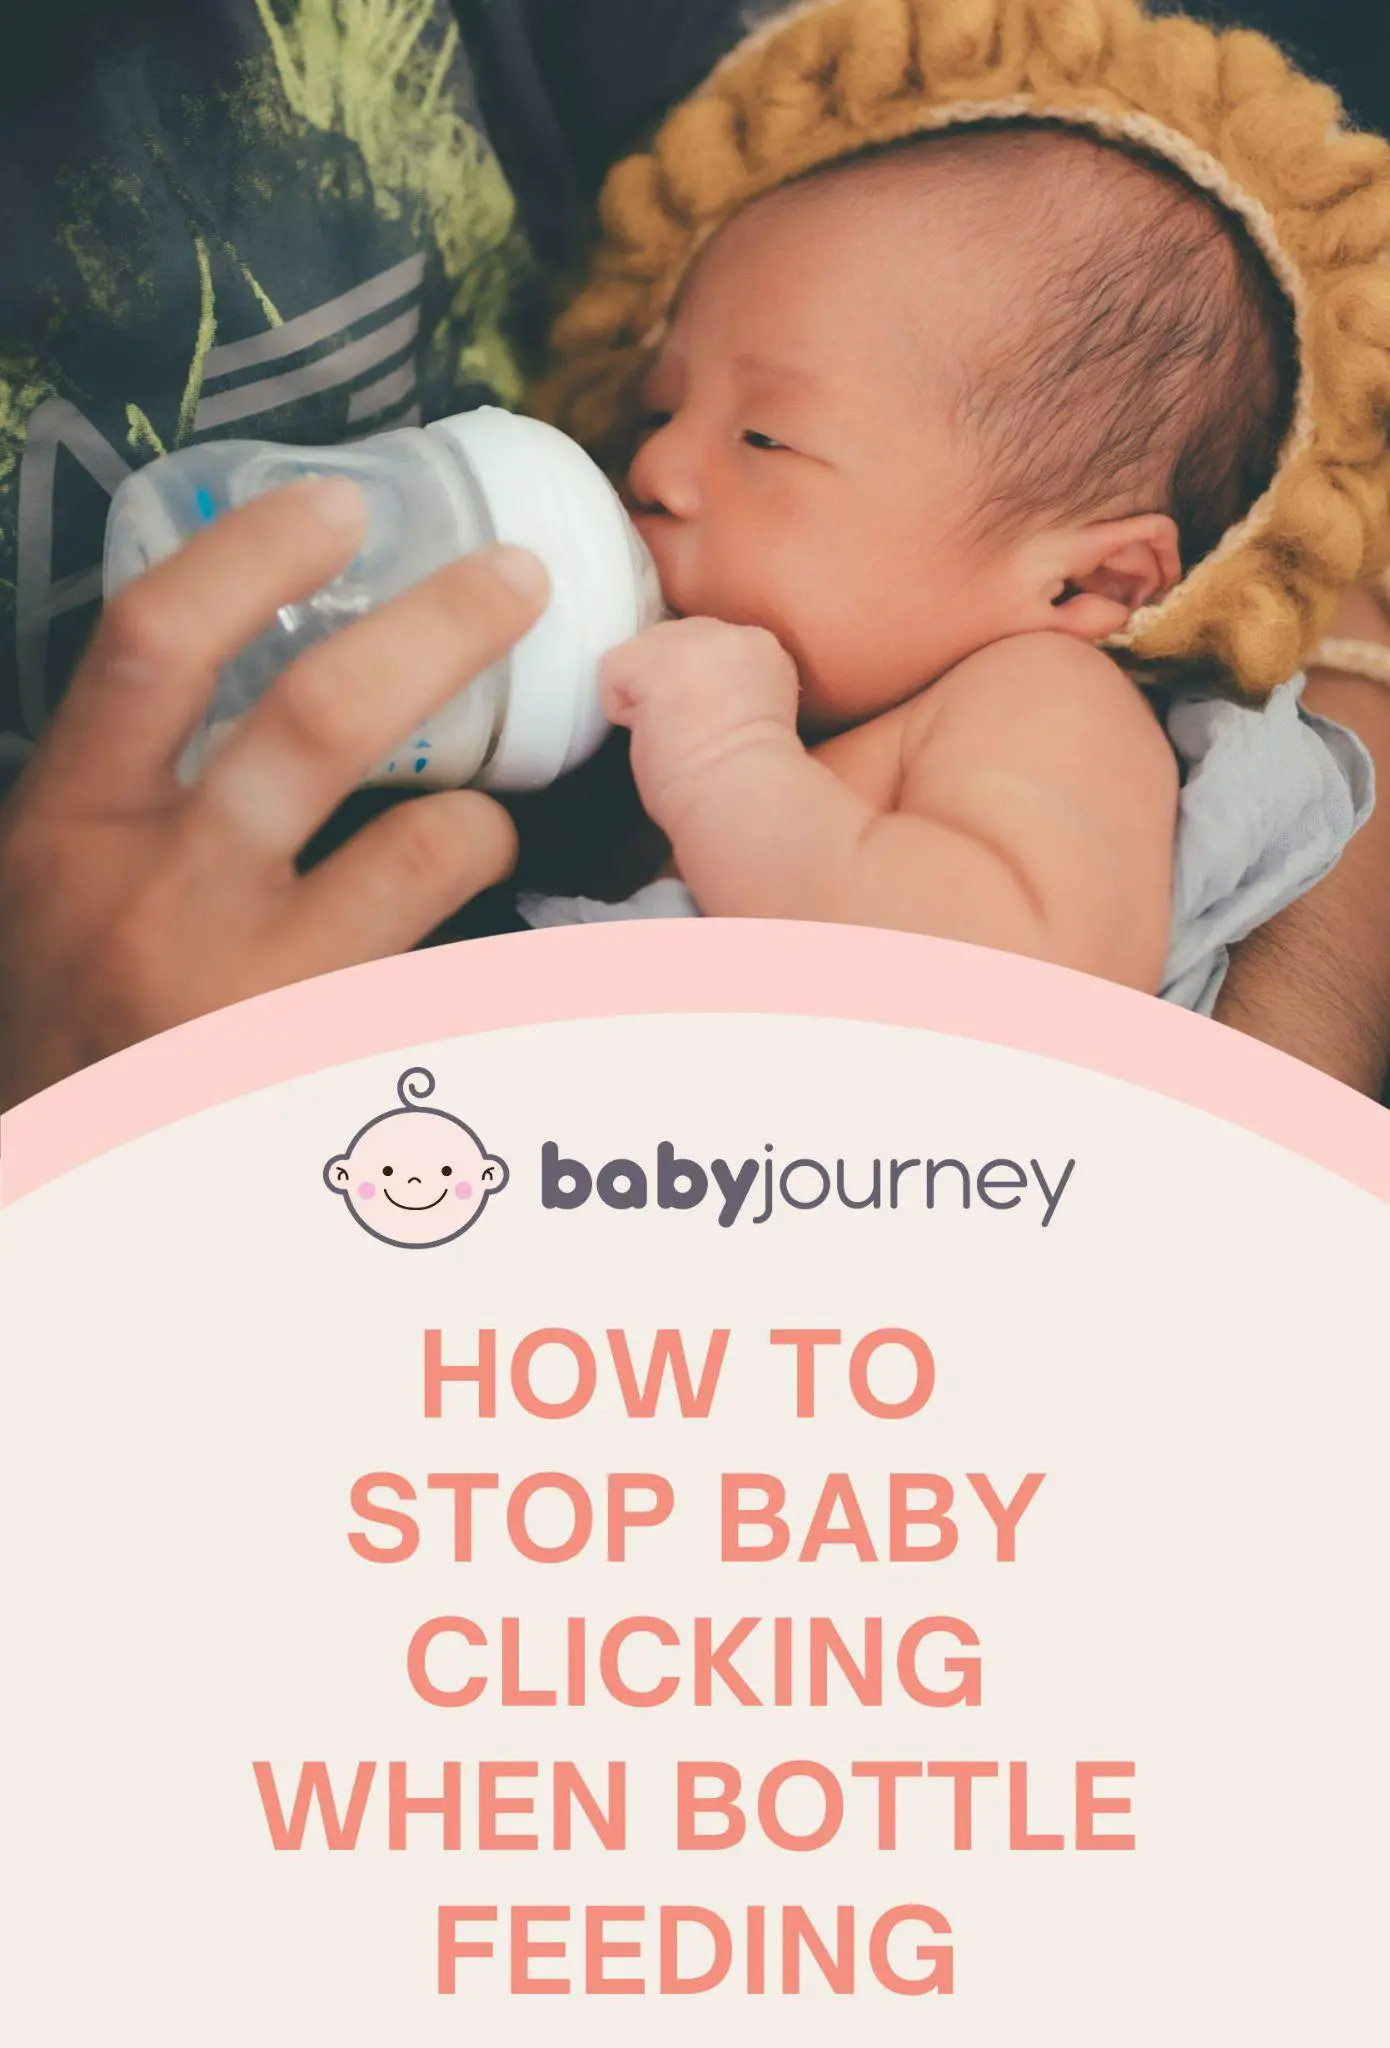 How To Stop Baby Clicking When Bottle Feeding Pinterest Image - Baby Journey